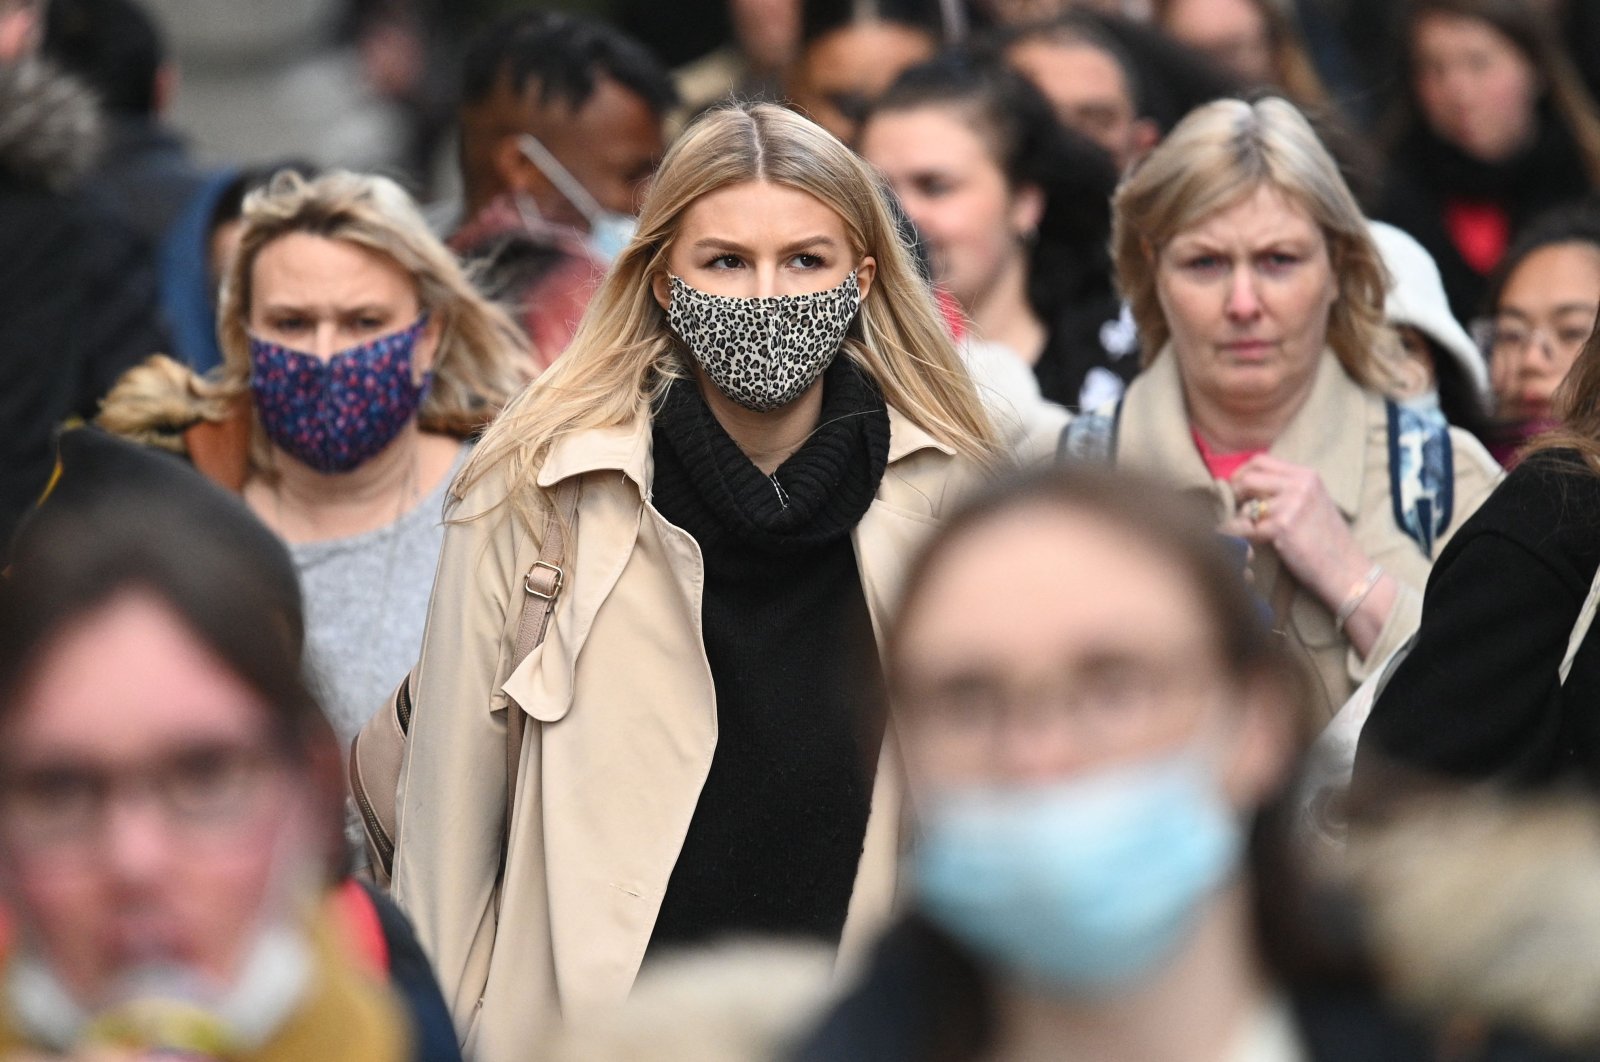 Shoppers, some wearing face masks, walk along Oxford Street in central London as compulsory mask-wearing in shops has been reintroduced in England as fear rises over the omicron variant of COVID-19, Britain, Dec. 4, 2021. (AFP Photo)